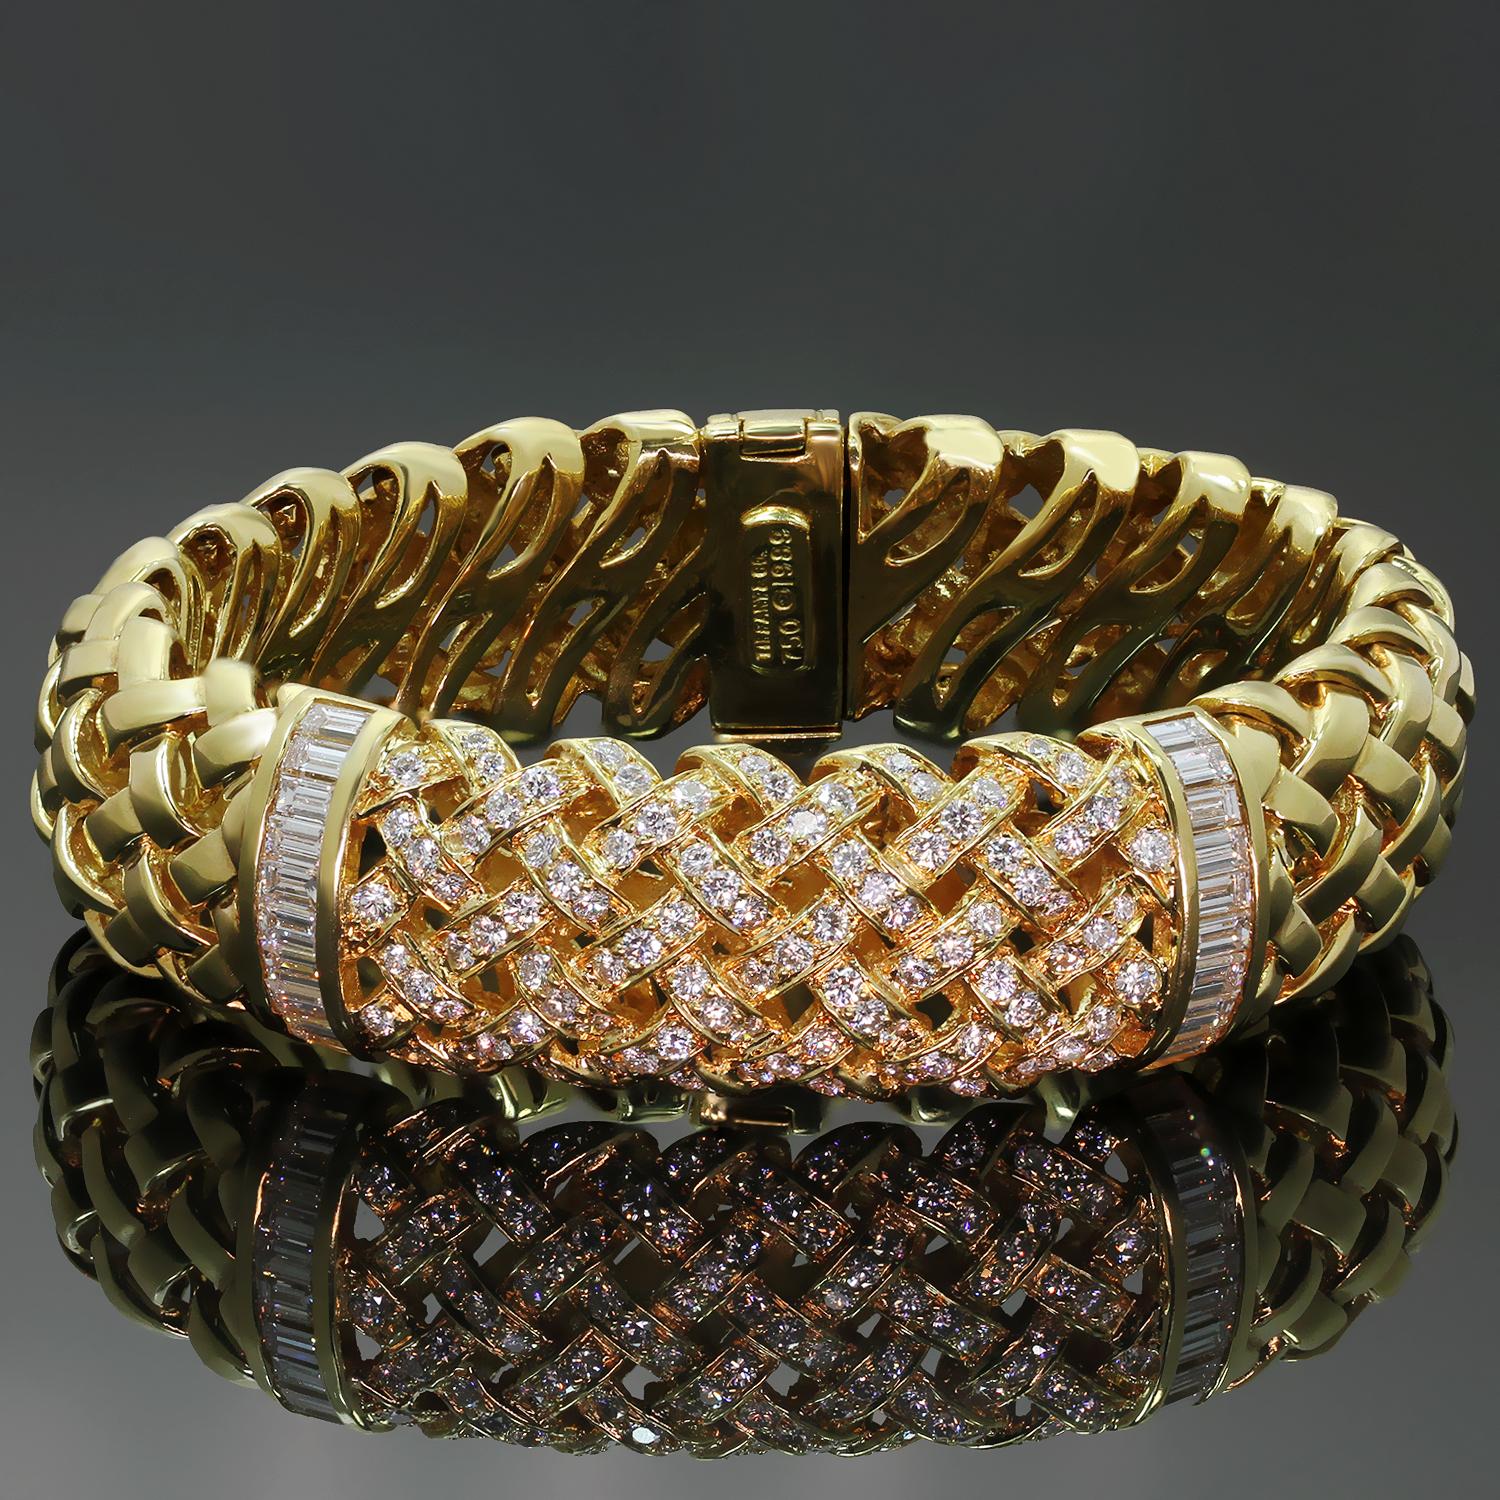 This fabulous bracelet from the exquisite Vannerie collection by Tiffany & Co. is crafted in 18k yellow gold and set with 100 brilliant-cut round diamonds weighing an estimated 3.50 carats and 20 baguette-cut diamonds weighing an estimated 2.50